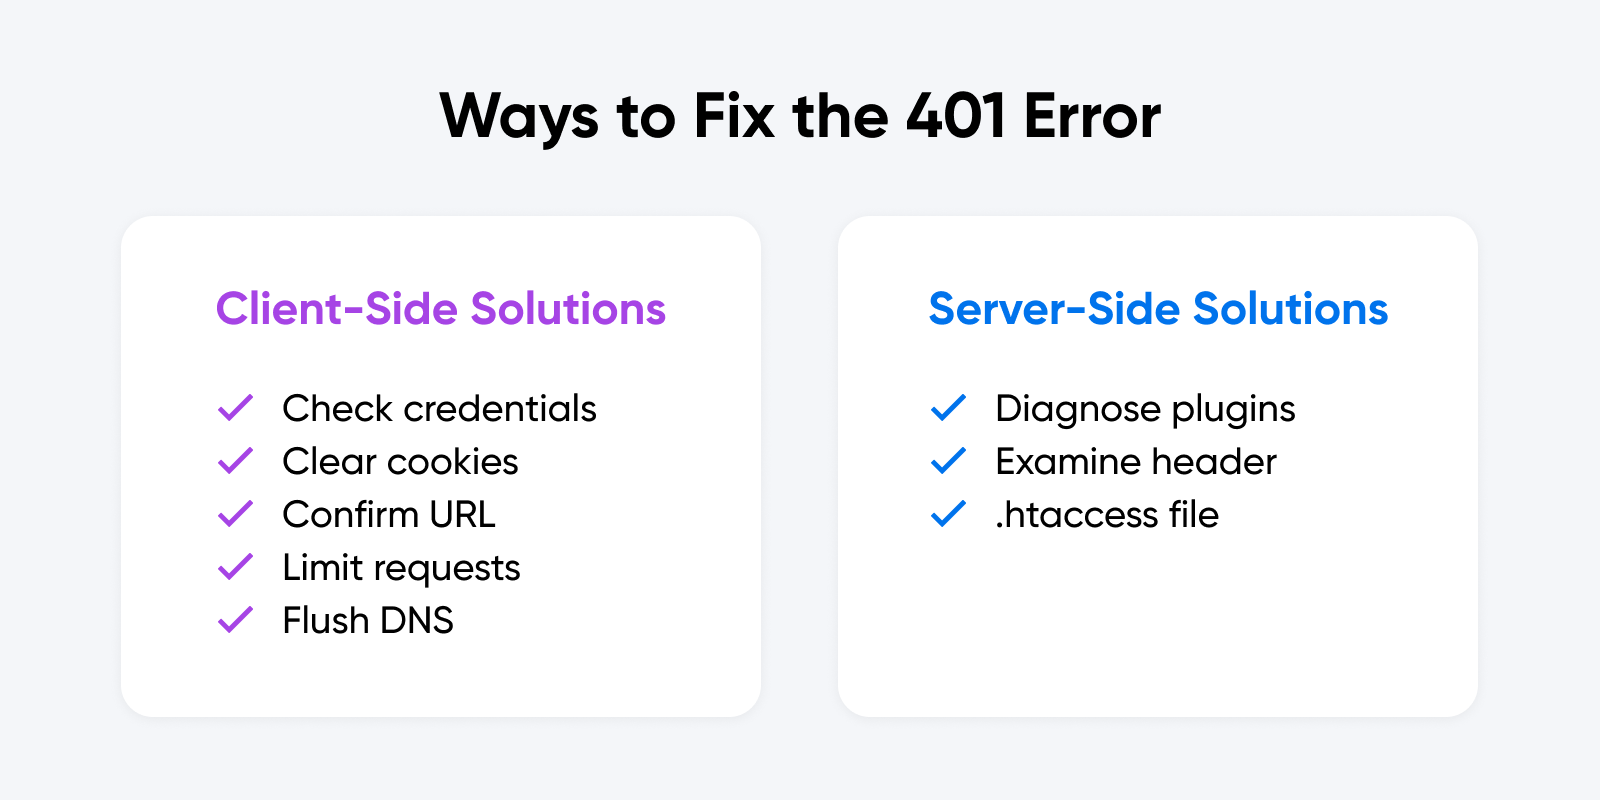 Ways to fix the 401 error. On client-side solution, the client can start to check credentials, clear cookies. confirm URL, limit requests, and flush DNS. On server-side solutions, check diagnose plugins, examine header, and .htaccess file